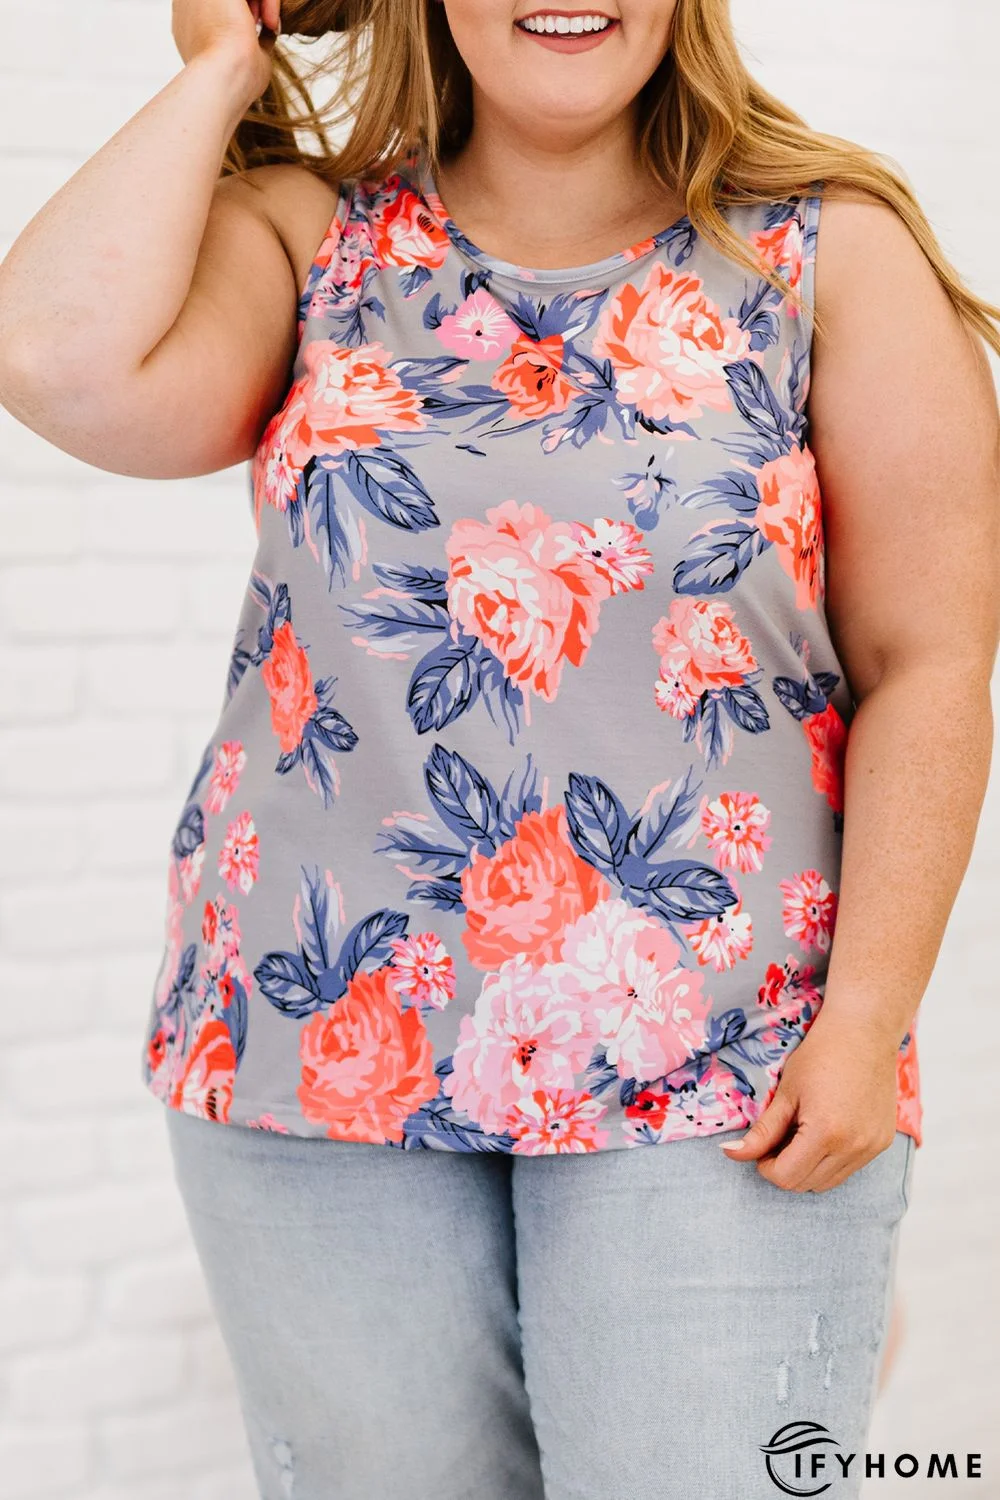 Gray Gray Grey Plus Size Floral Racerback Tank Top | IFYHOME